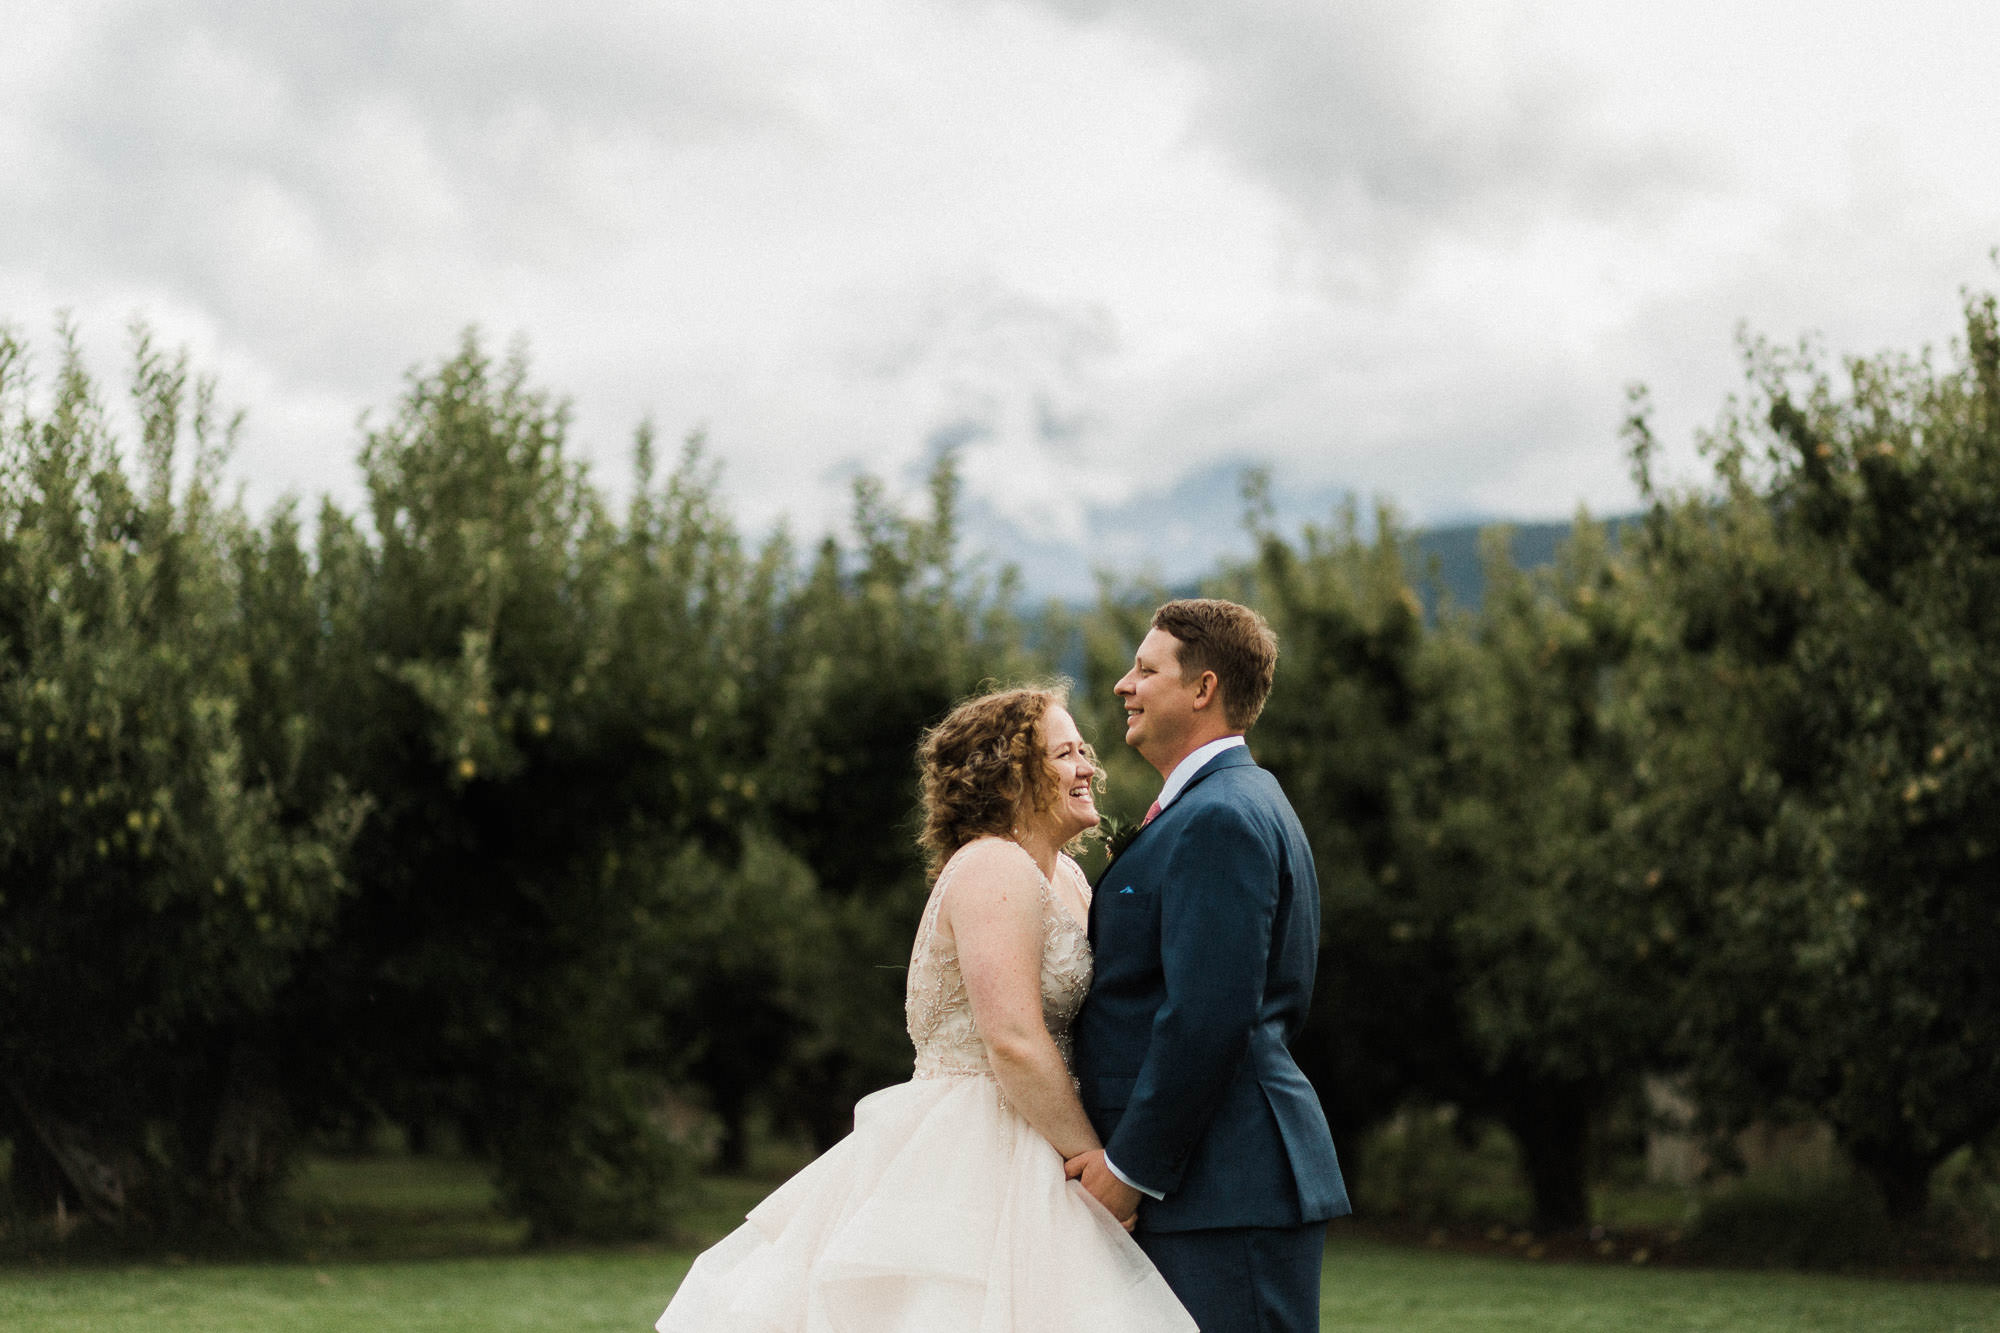 The bride and groom laugh together with Mt. Hood peeking out from clouds in the background.